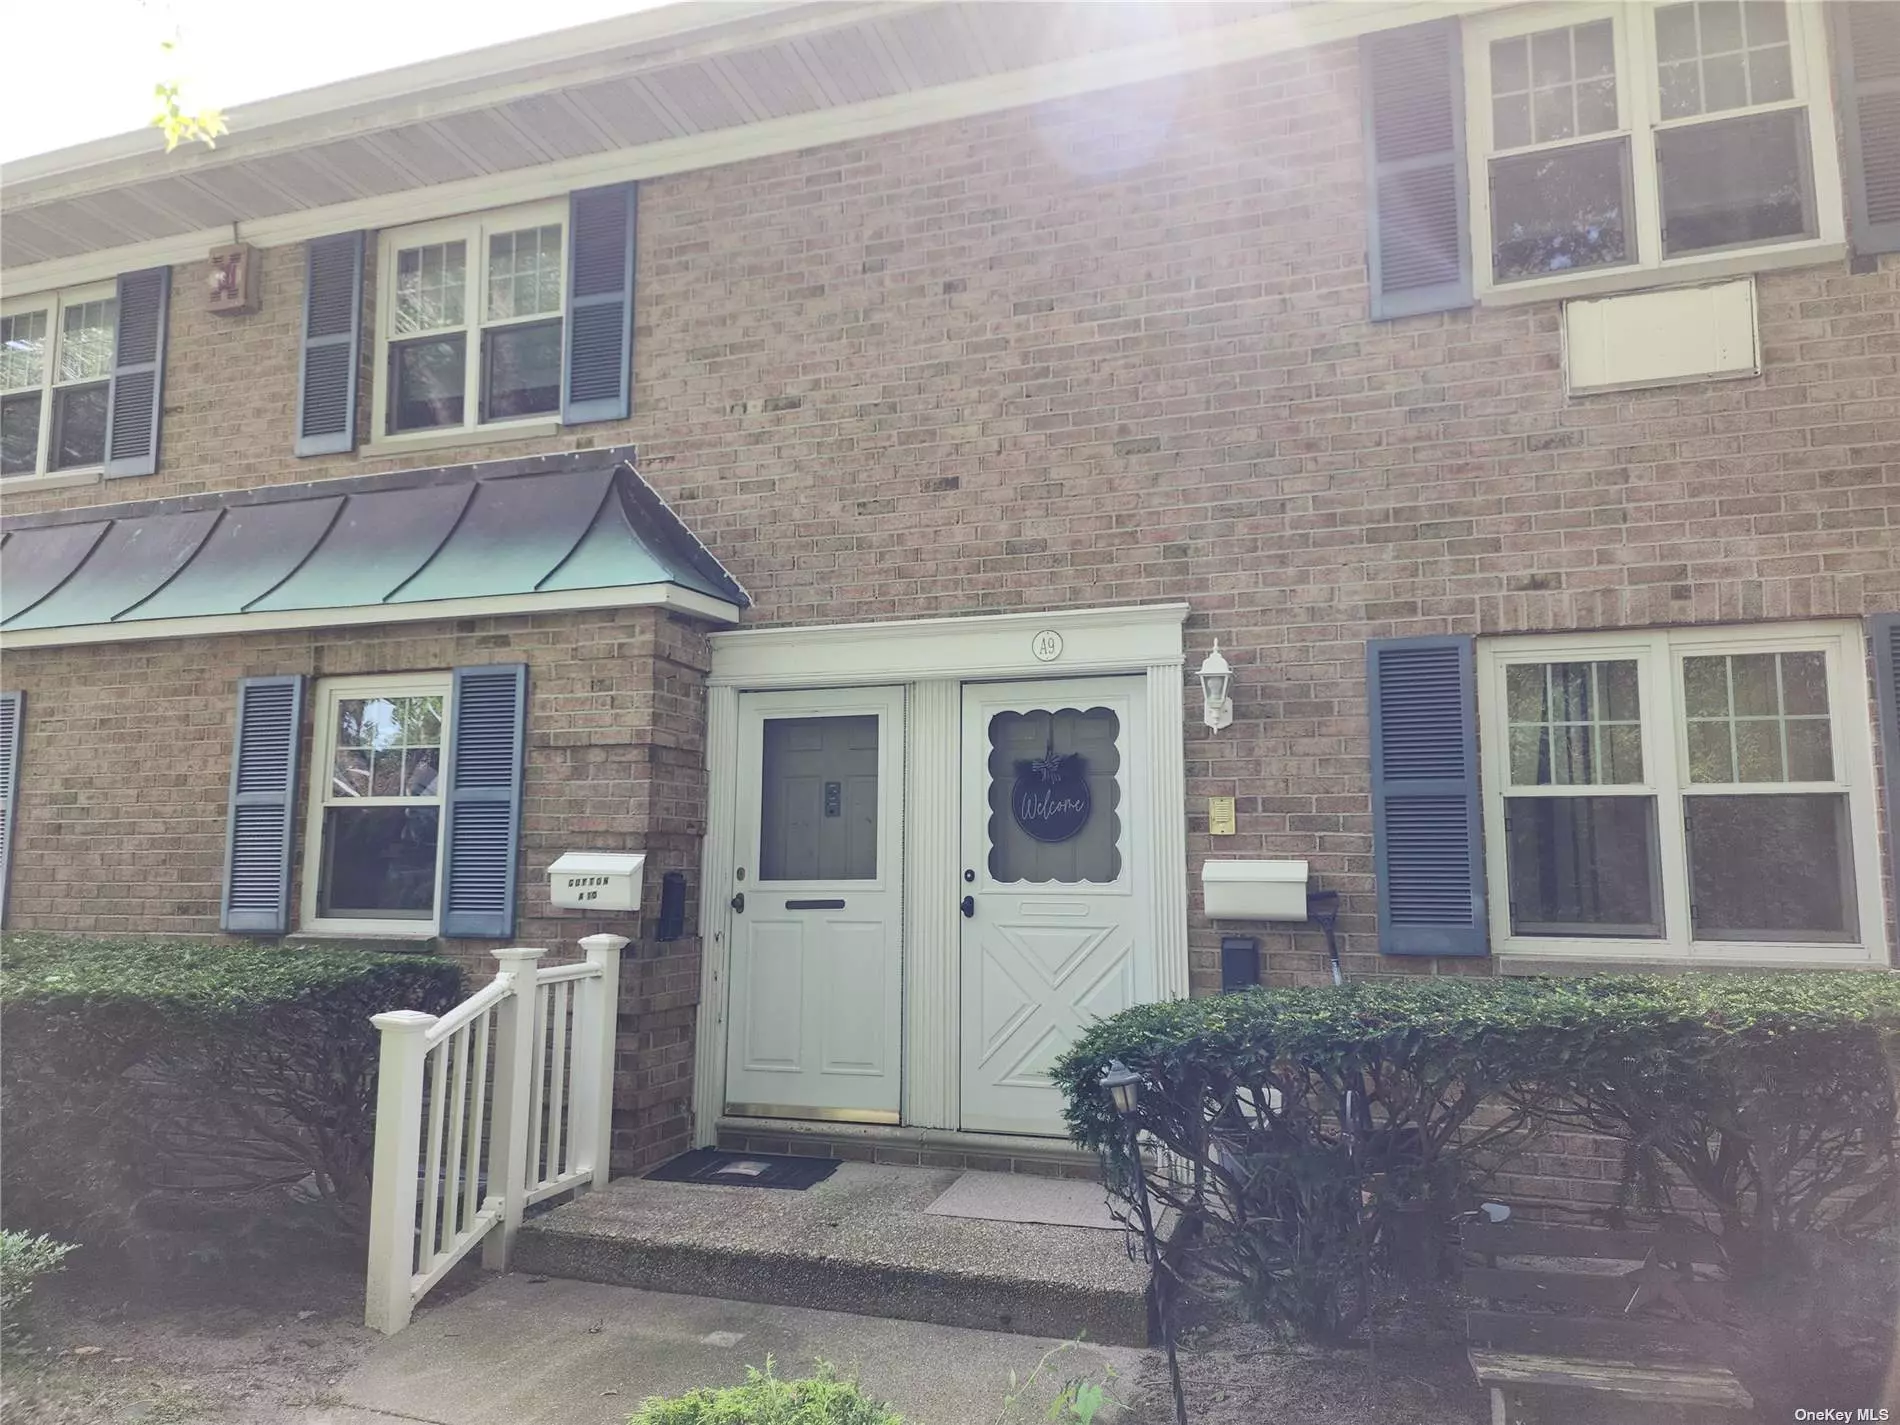 Enjoy Gated Community Living with this 1st Floor unit with 5 rooms 2 beds and 1 bath located in Sachem School District. Close to Shopping, Transportation and Major Roadways. Common Charges includes taxes heat gas cooking water basic cable .Amenities include Pool , tennis, community room with laundry on premises .